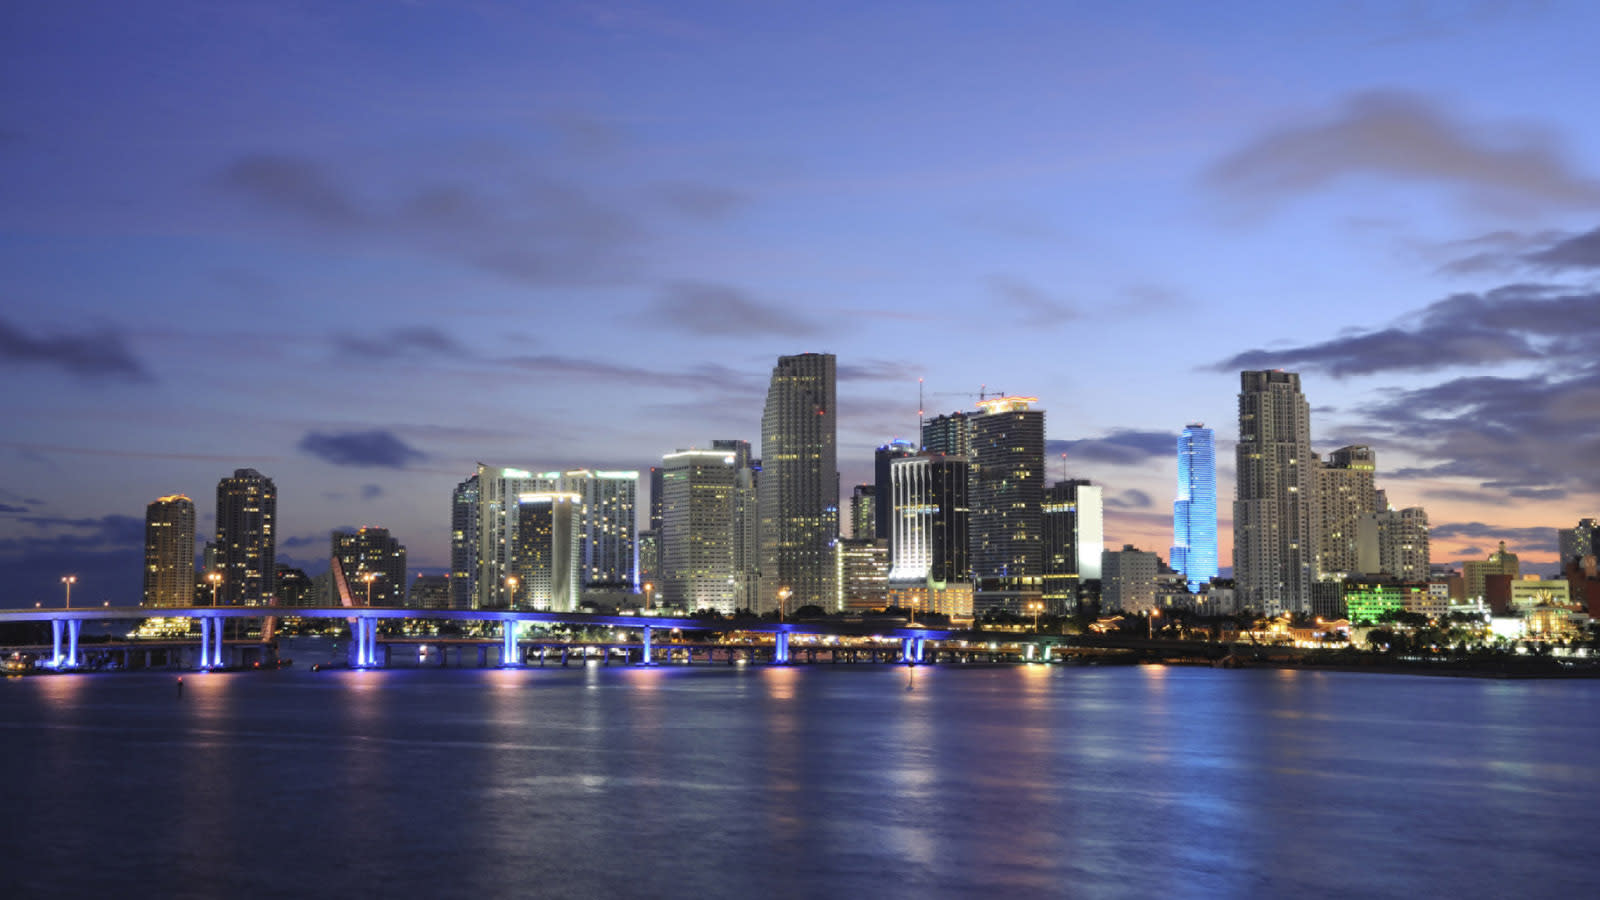 The beautiful skyline of Miami at night with blue lights